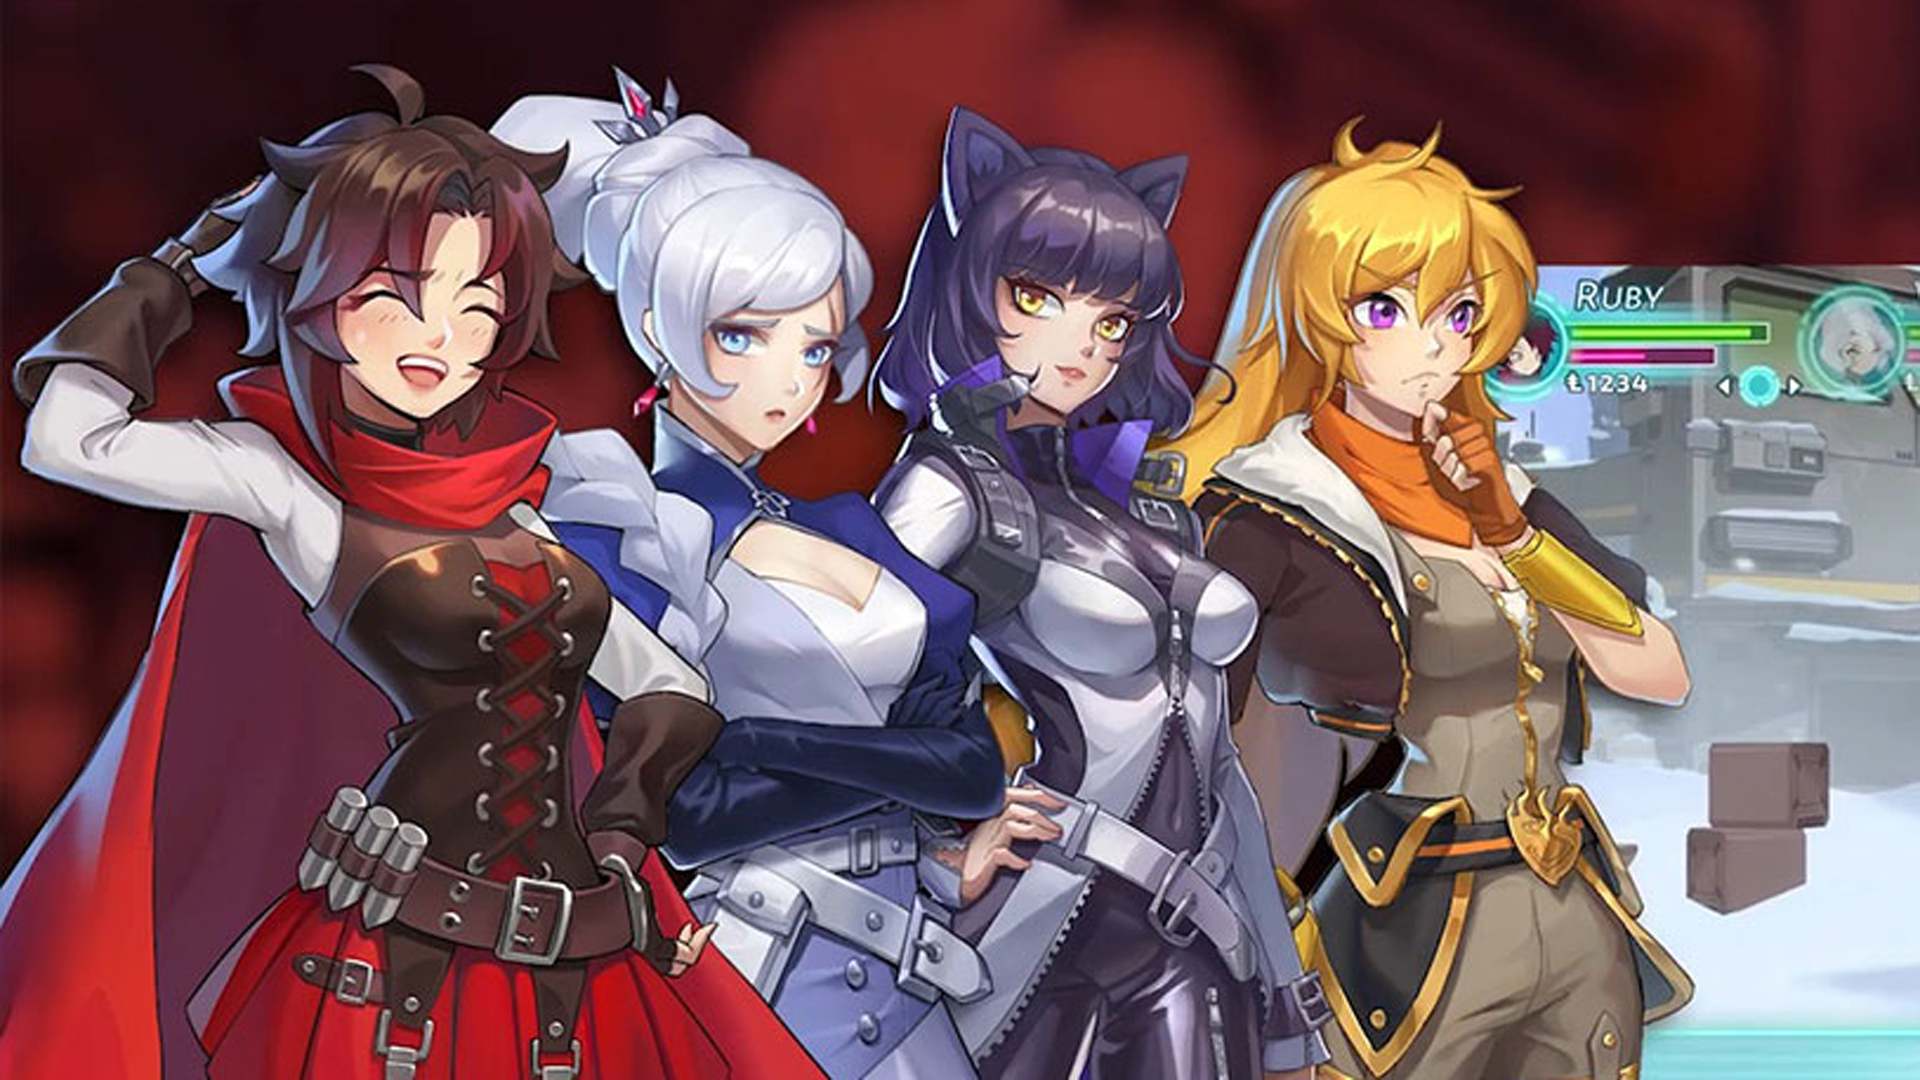 60+ Of The Greatest RWBY Quotes Fans Shouldn't Miss!